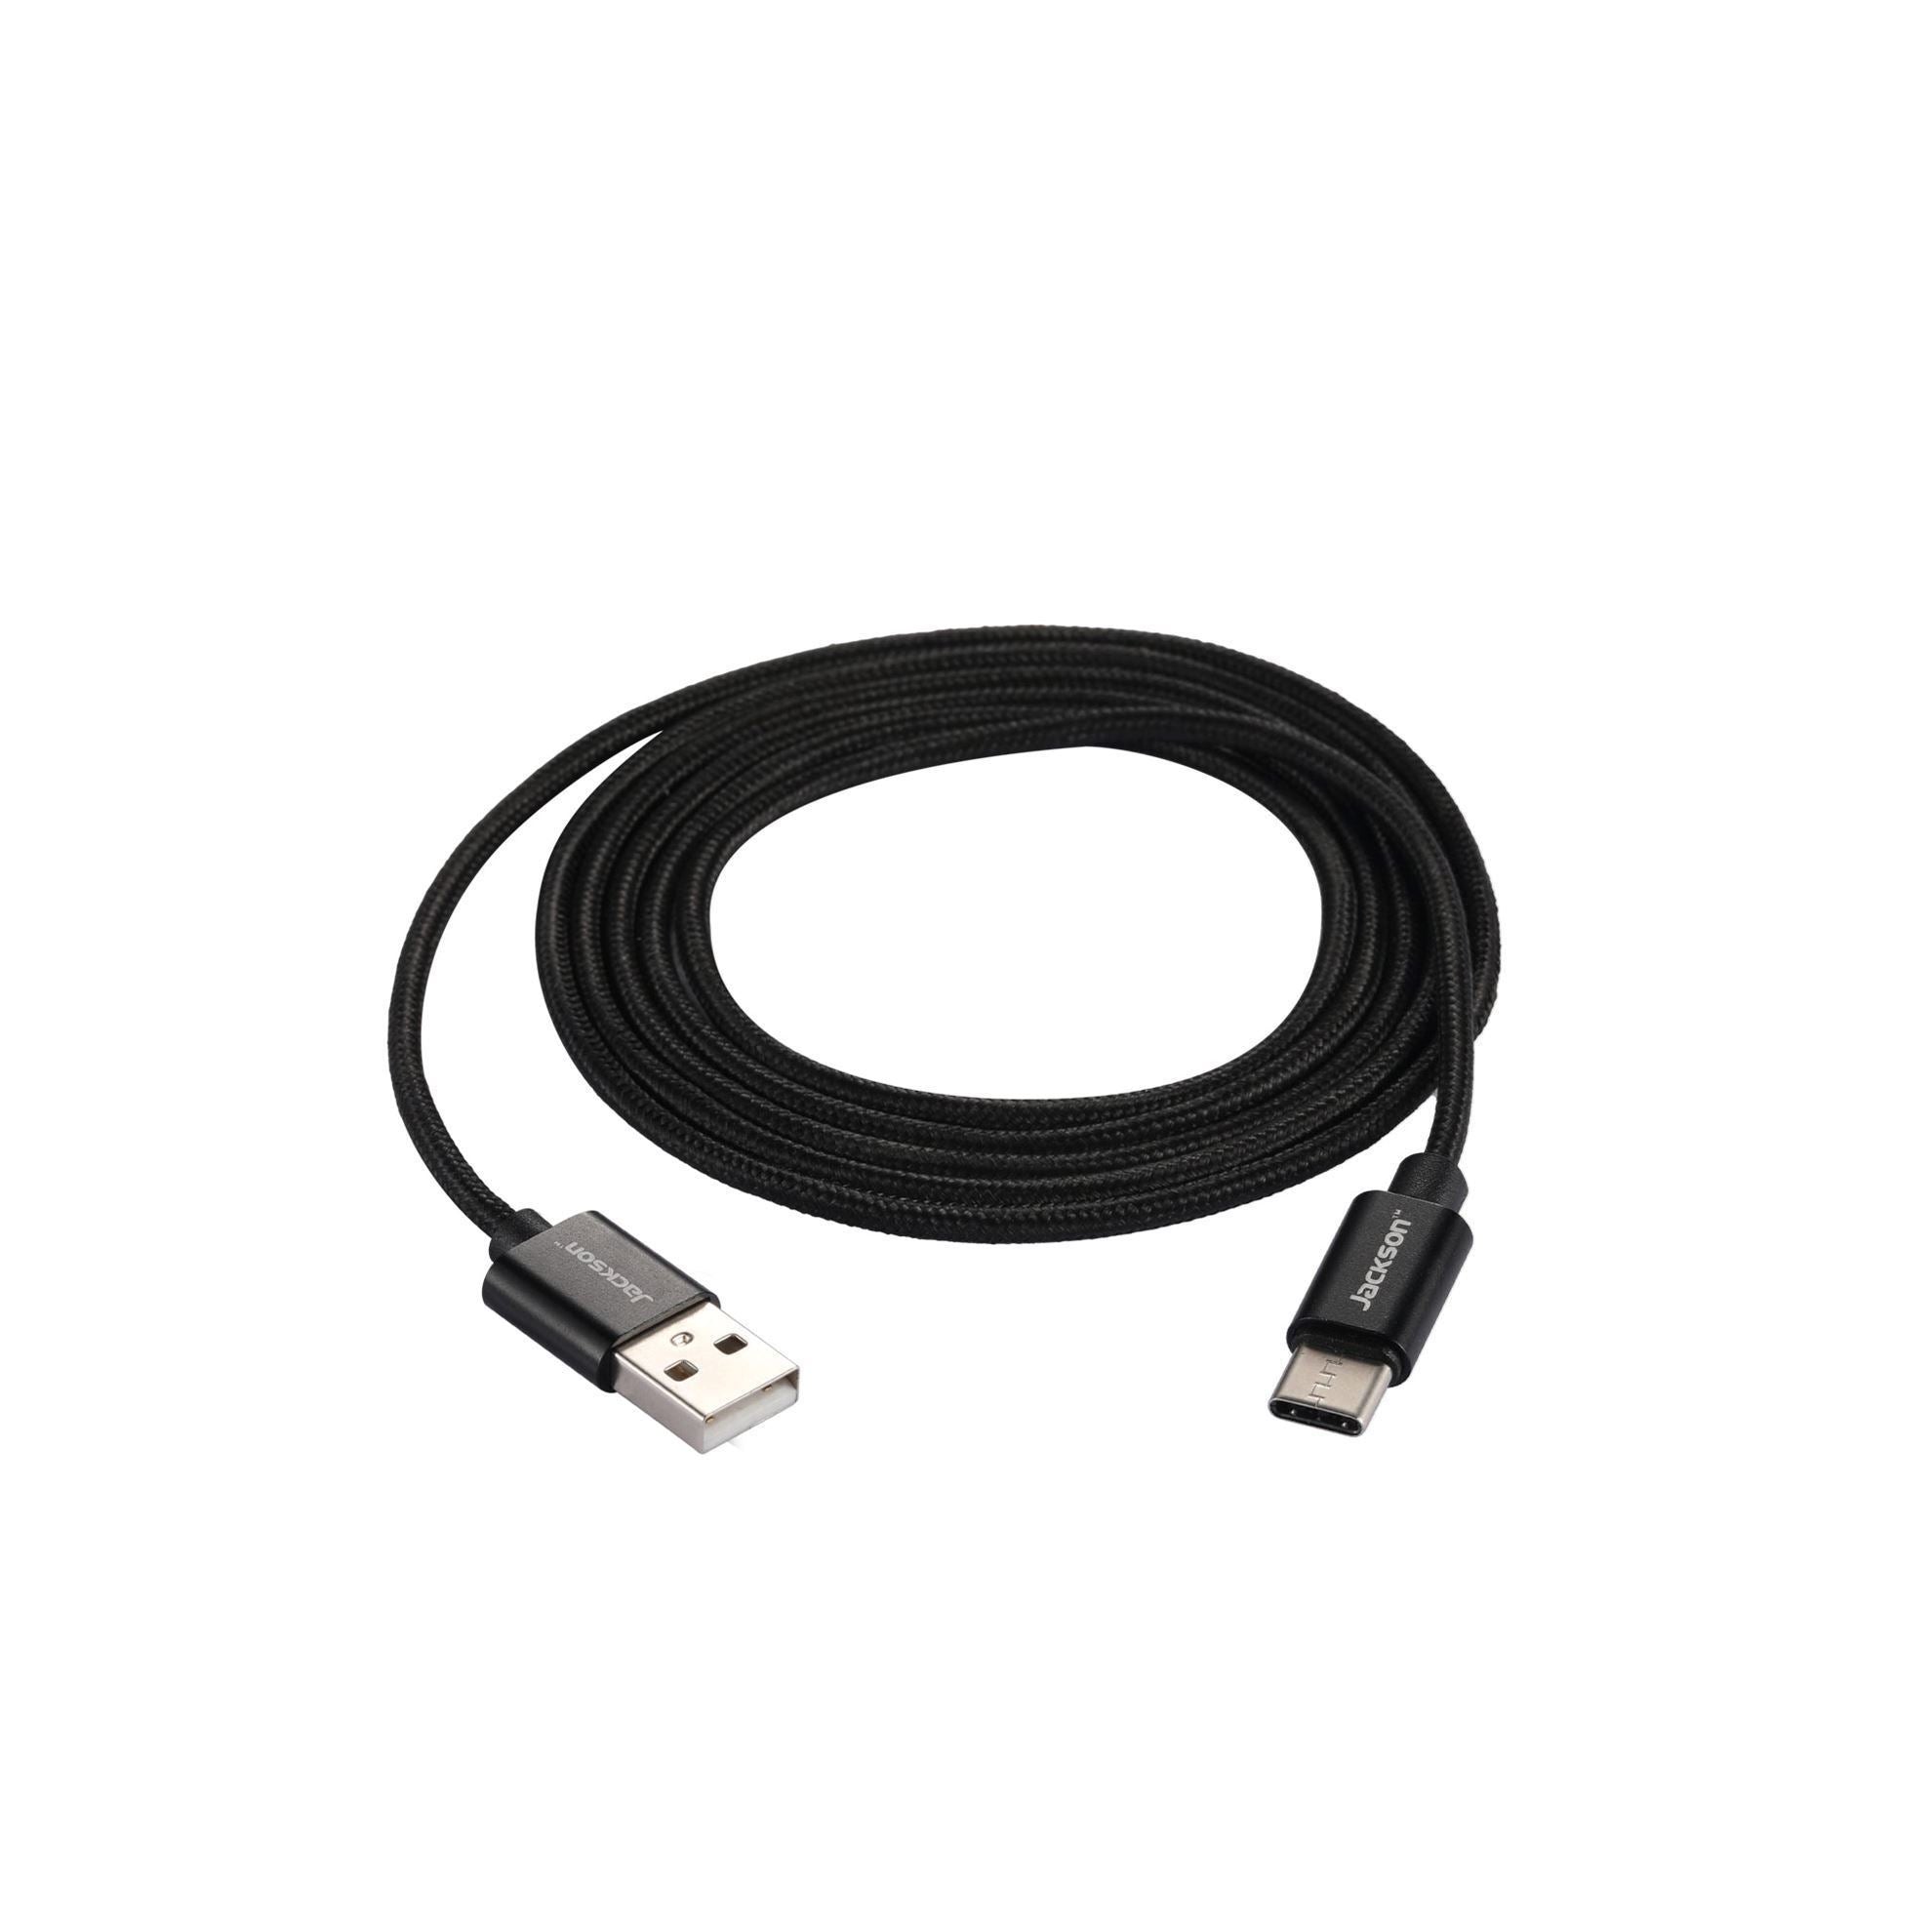 JACKSON_1.5m_USB-A_to_USB-C_Sync_&_Charge_Cable._Braided_Cable_Provides_Extra_Durability,_Black_Colour. 160